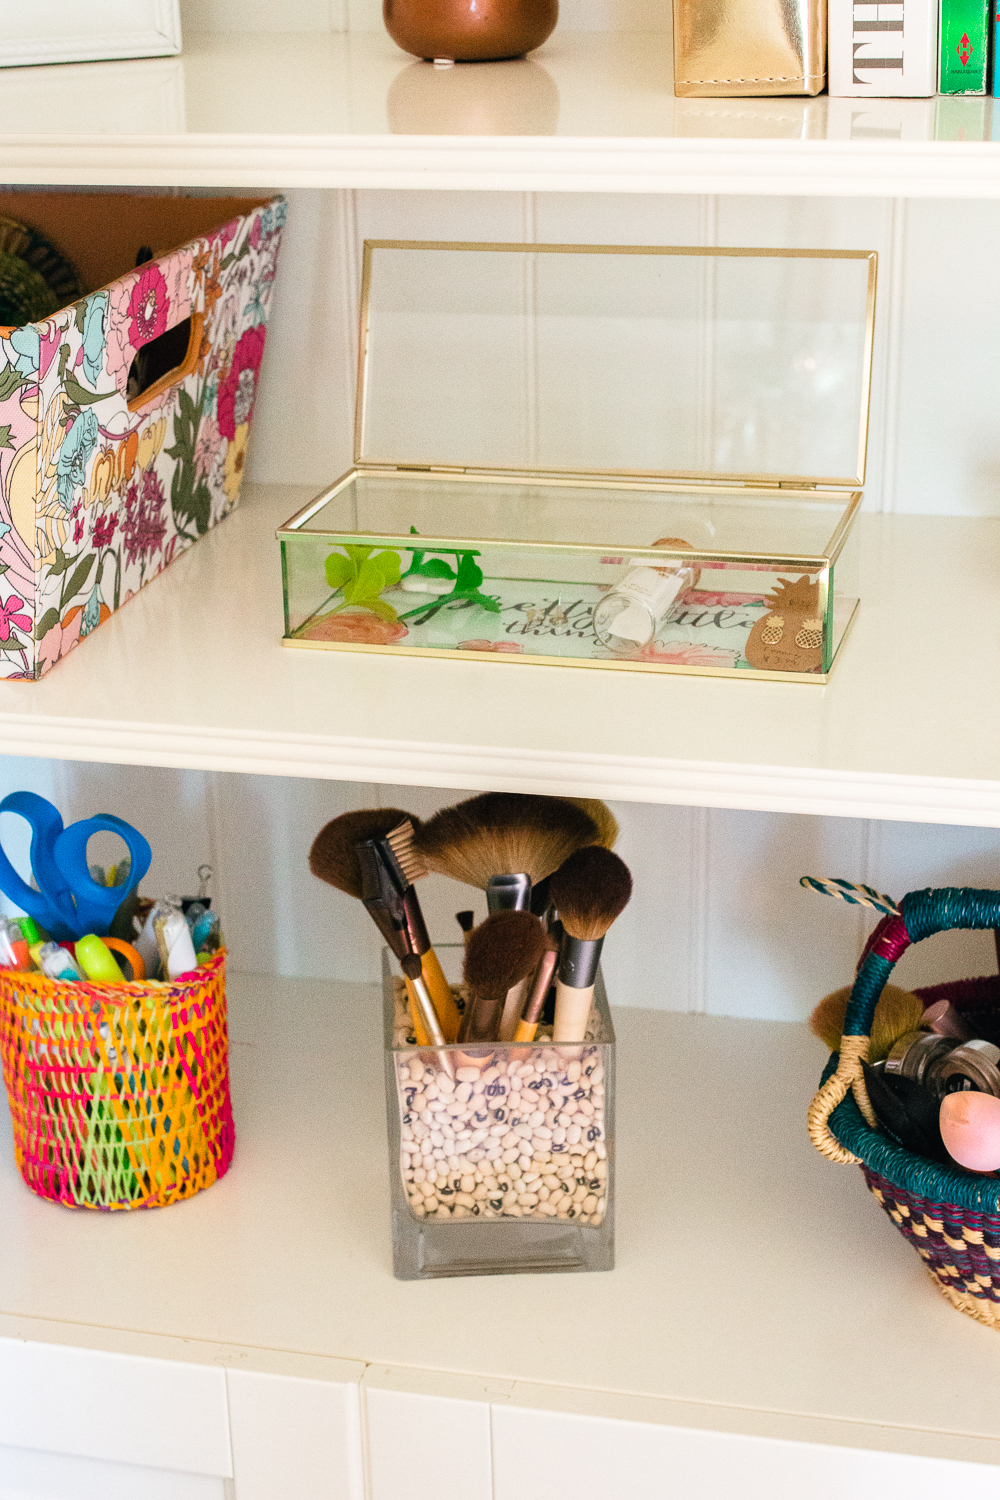 How to Organize Jewelry, Accessorizes and Makeup in a Small Space